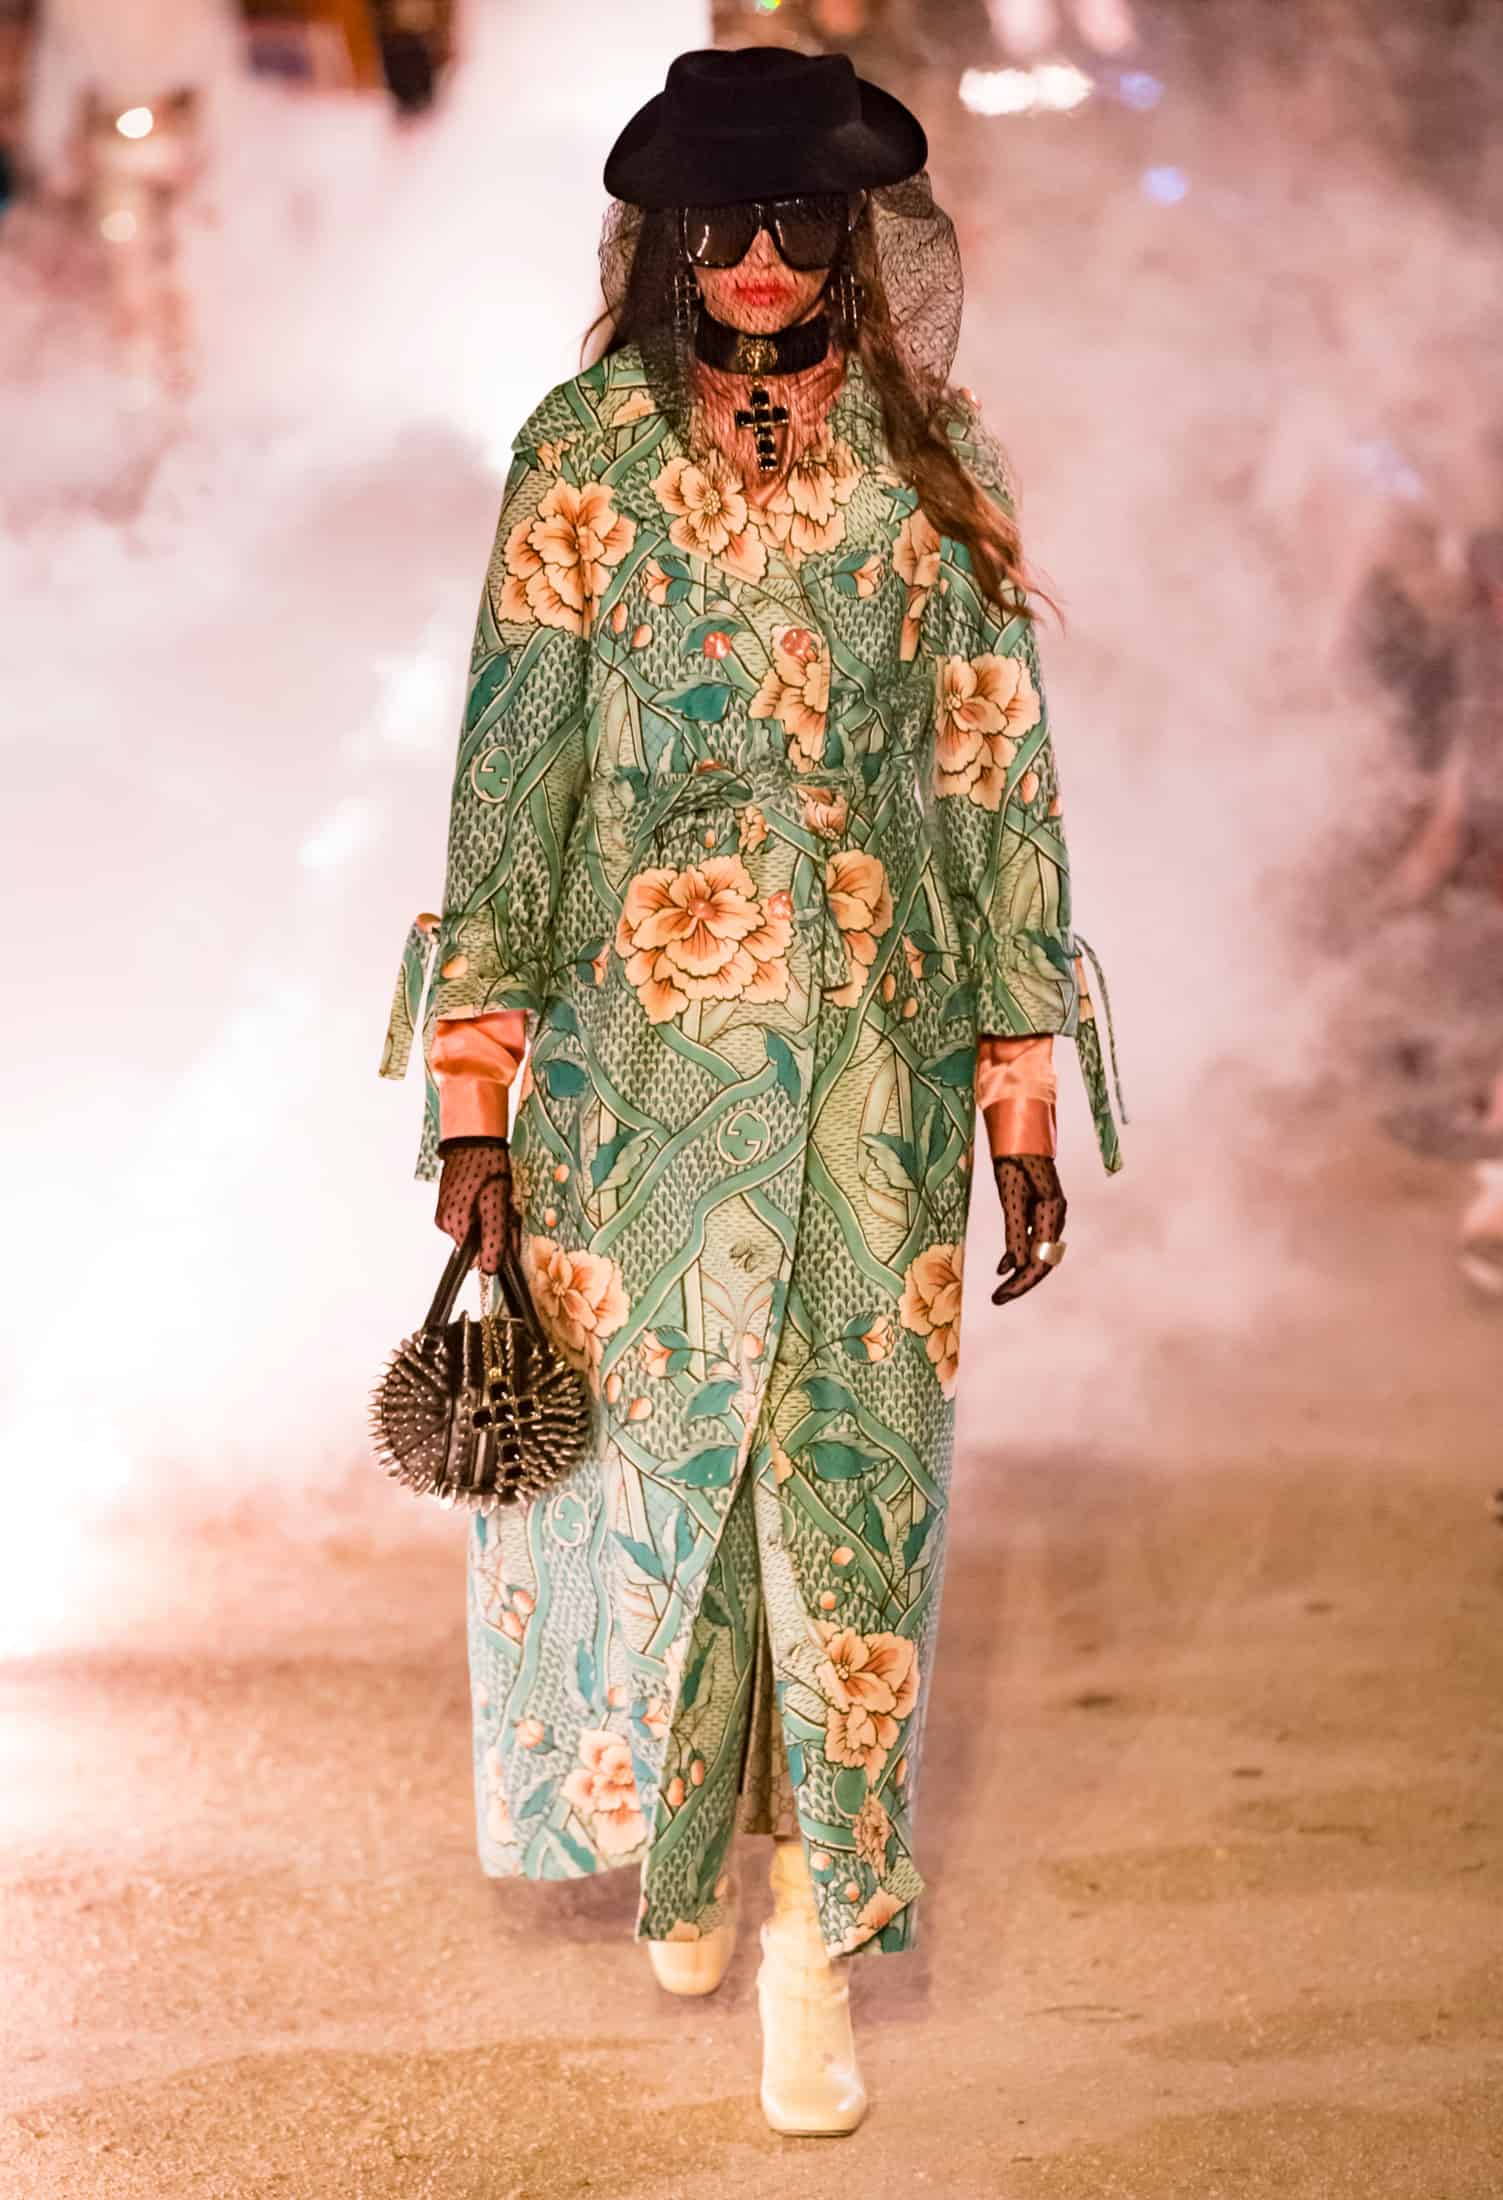 Gucci's 2019 Cruise Show Was Creepy AF (In a Good Way)